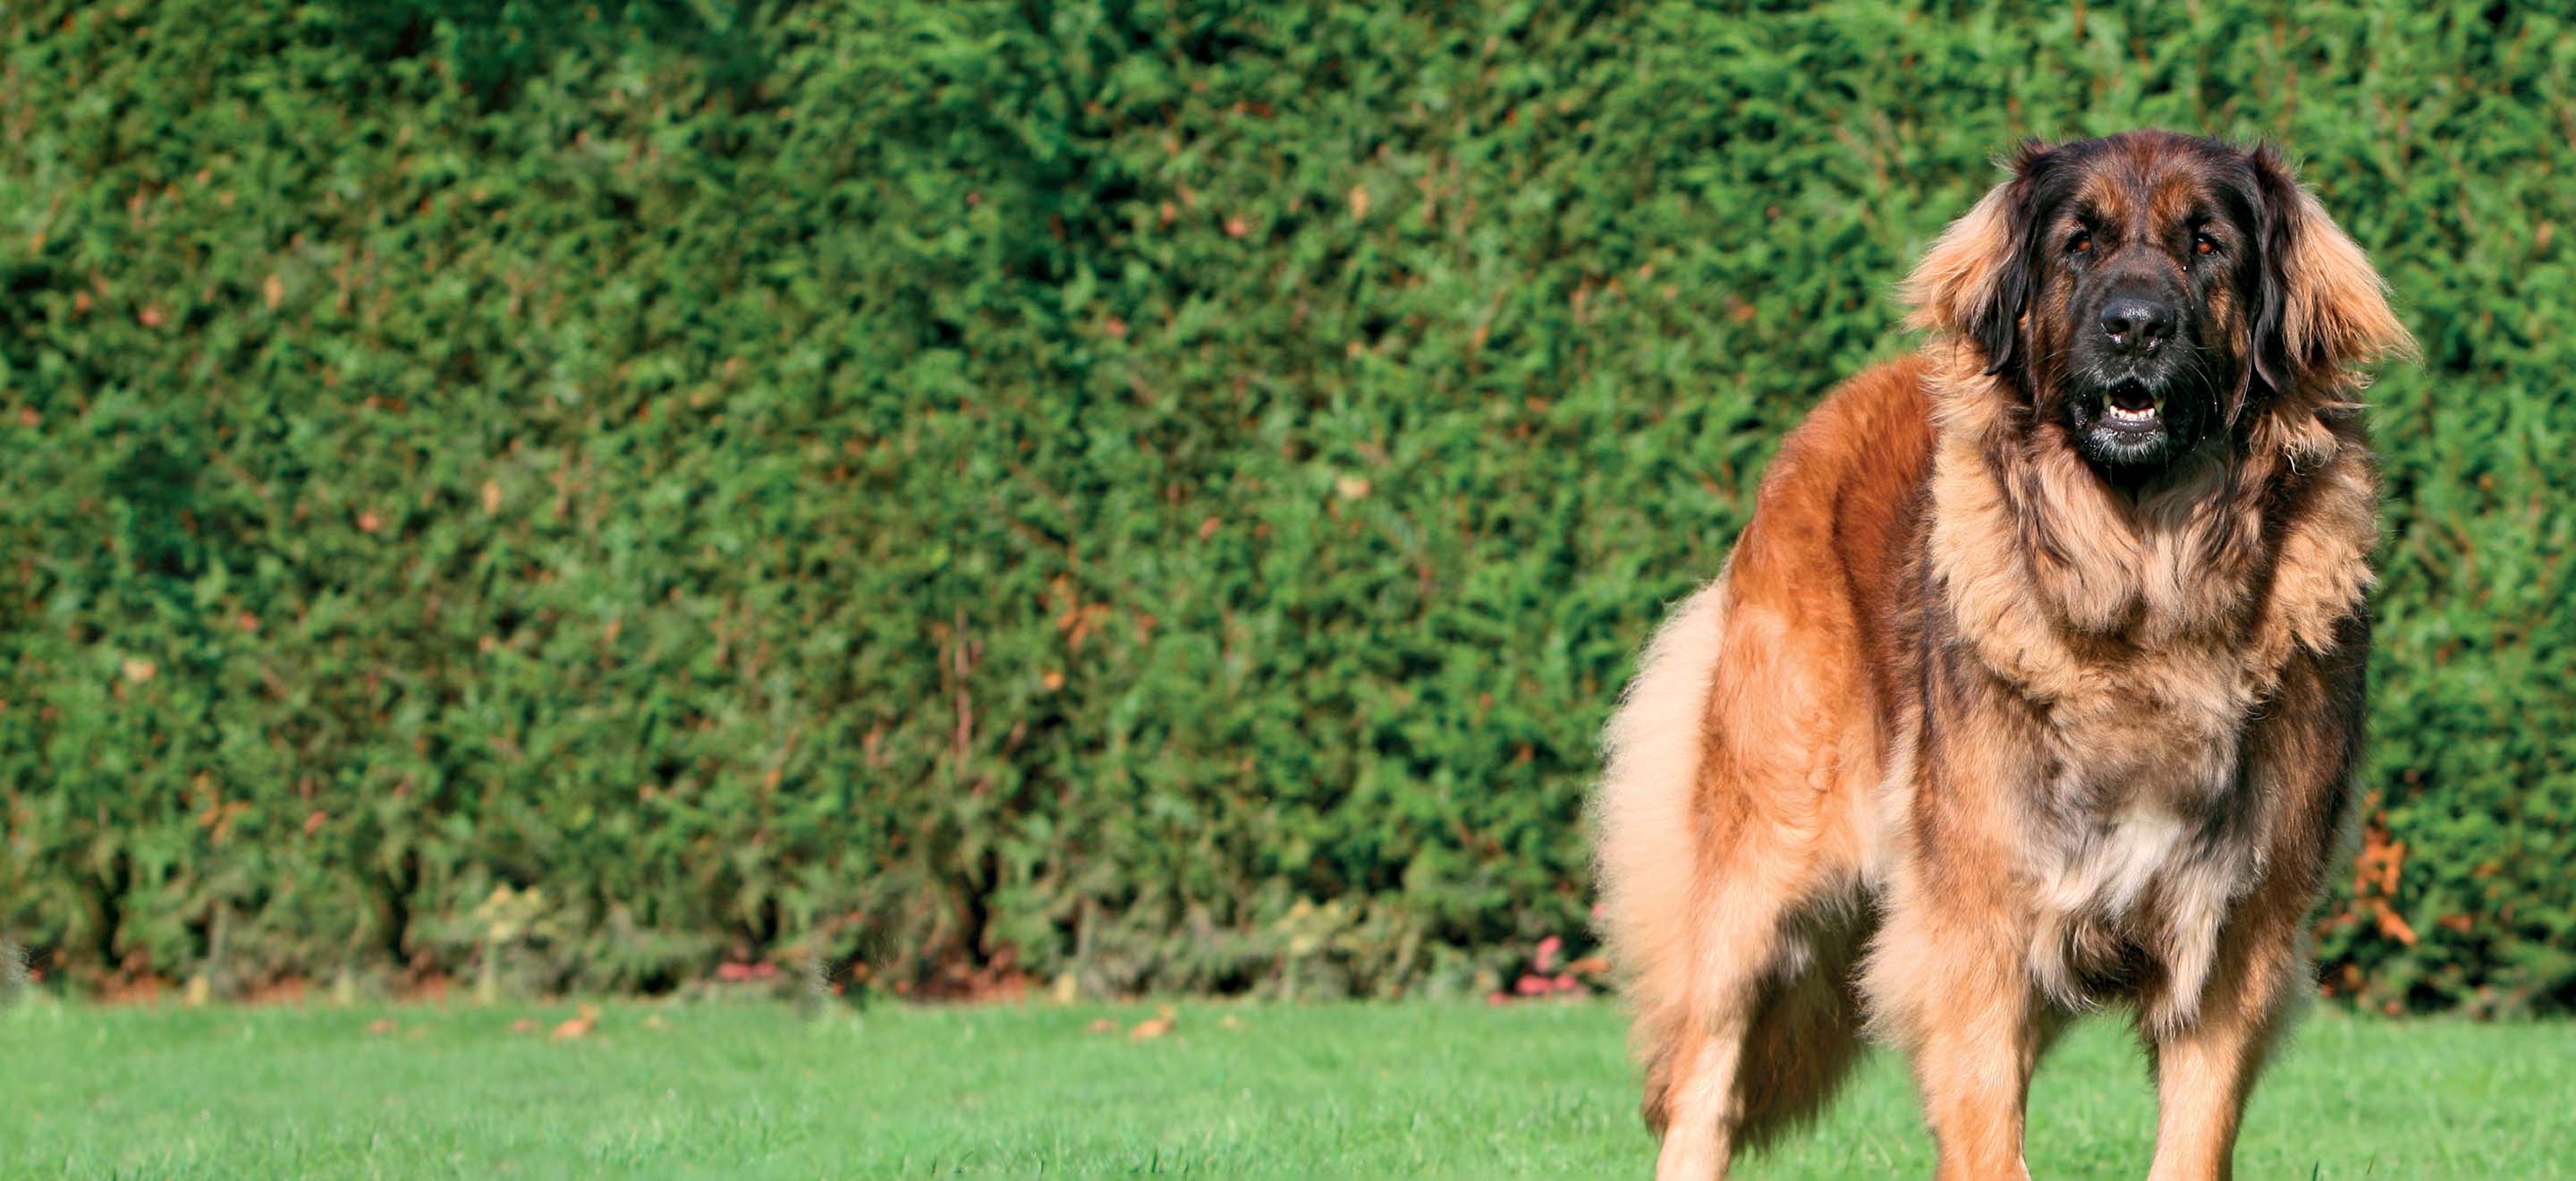 A Leonberger dog standing on the grass in front of a hedge image